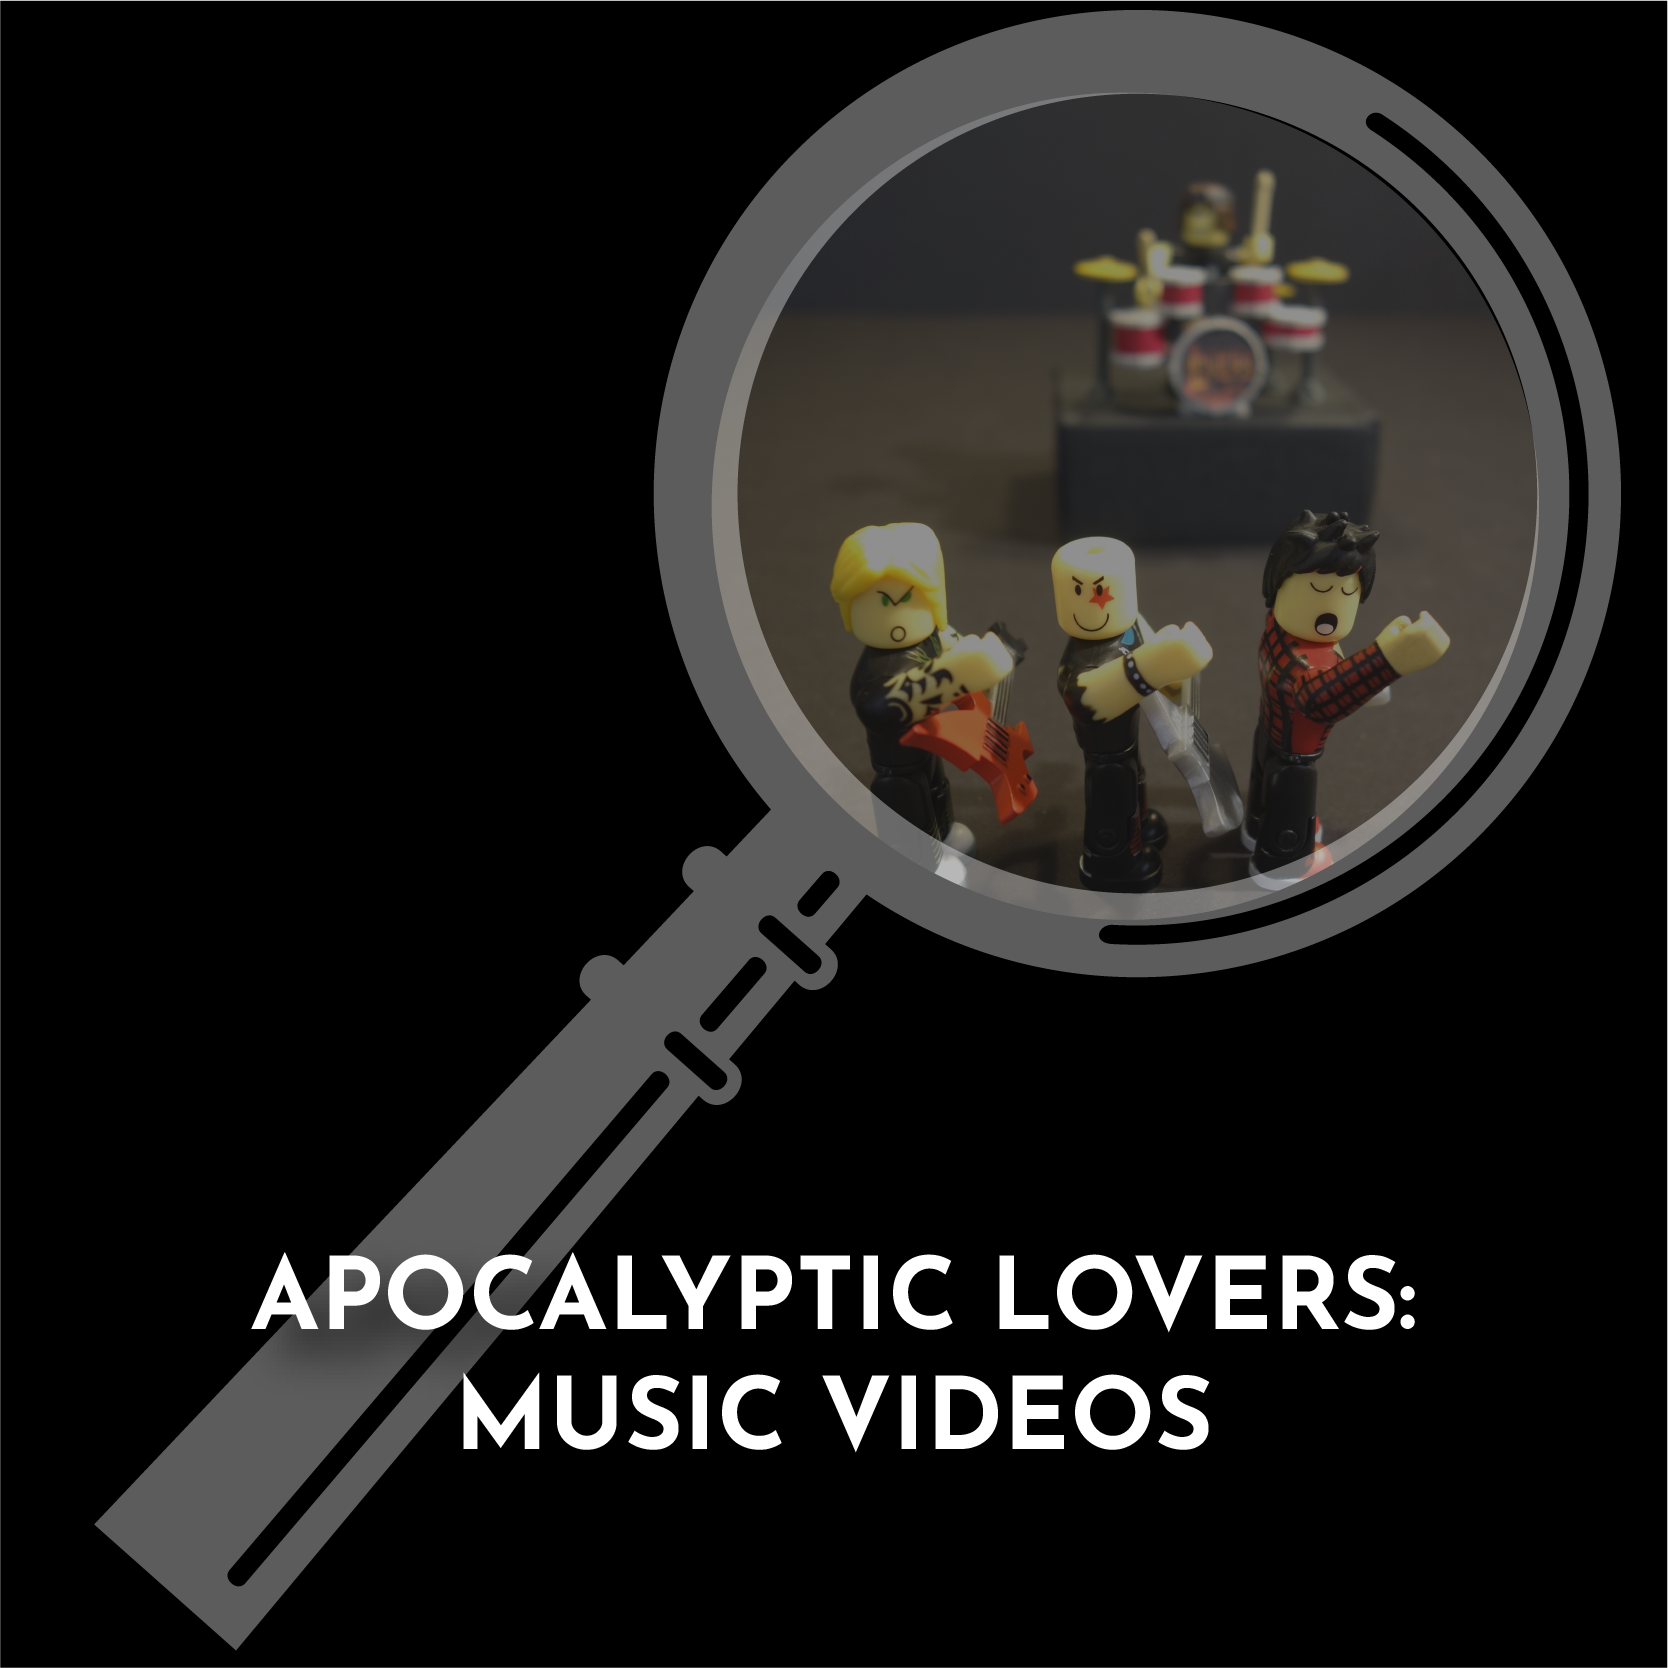 Apocalyptic Lovers Music Videos